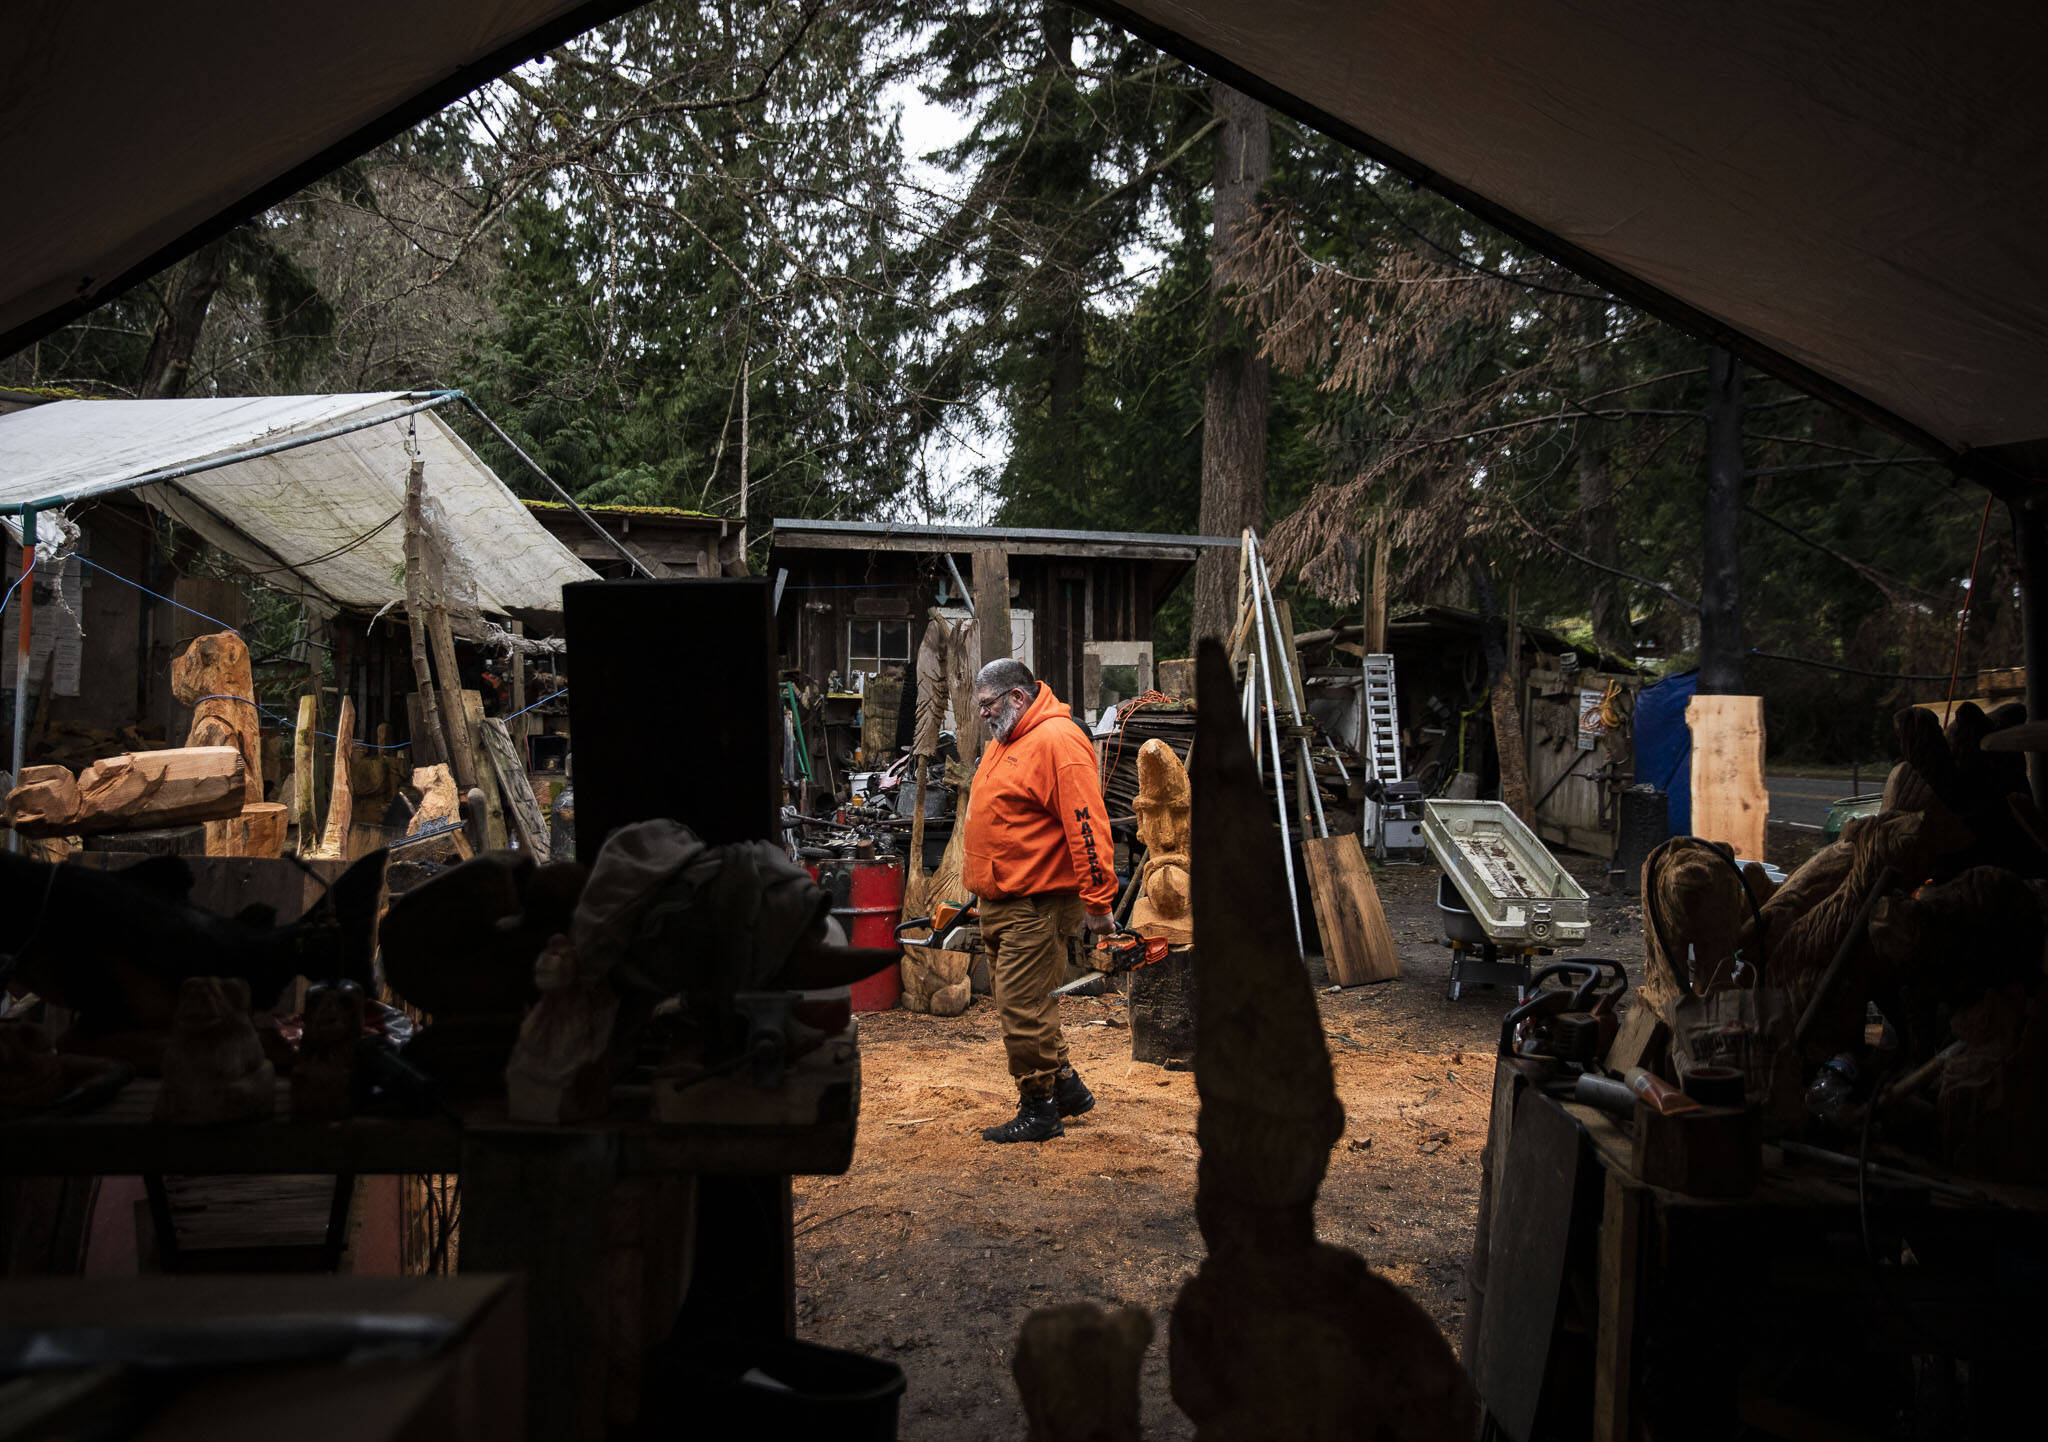 Steve Backus walks around the grounds as he works on different projects in Clinton. (Olivia Vanni / The Herald)